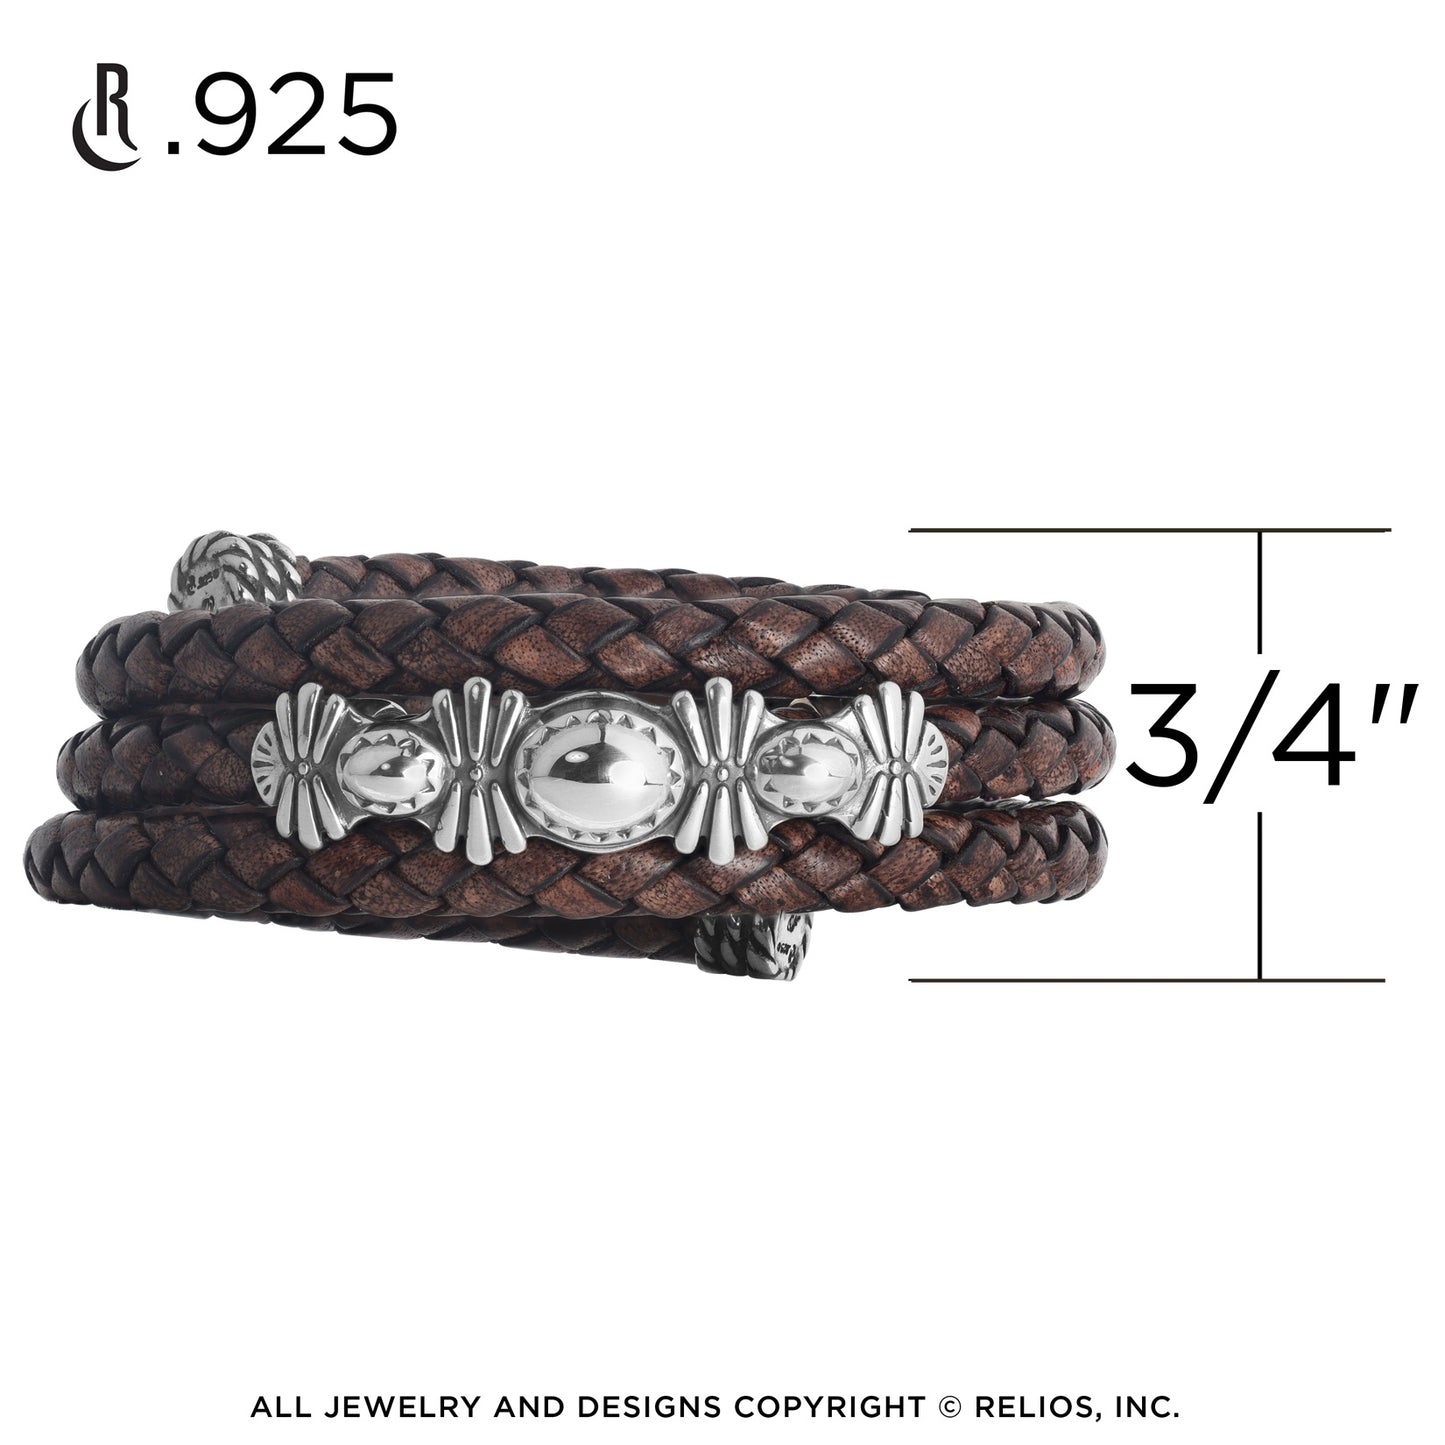 Sterling Silver Red Brown Braided Leather Coil Wrap Bracelet One Size Fits Most